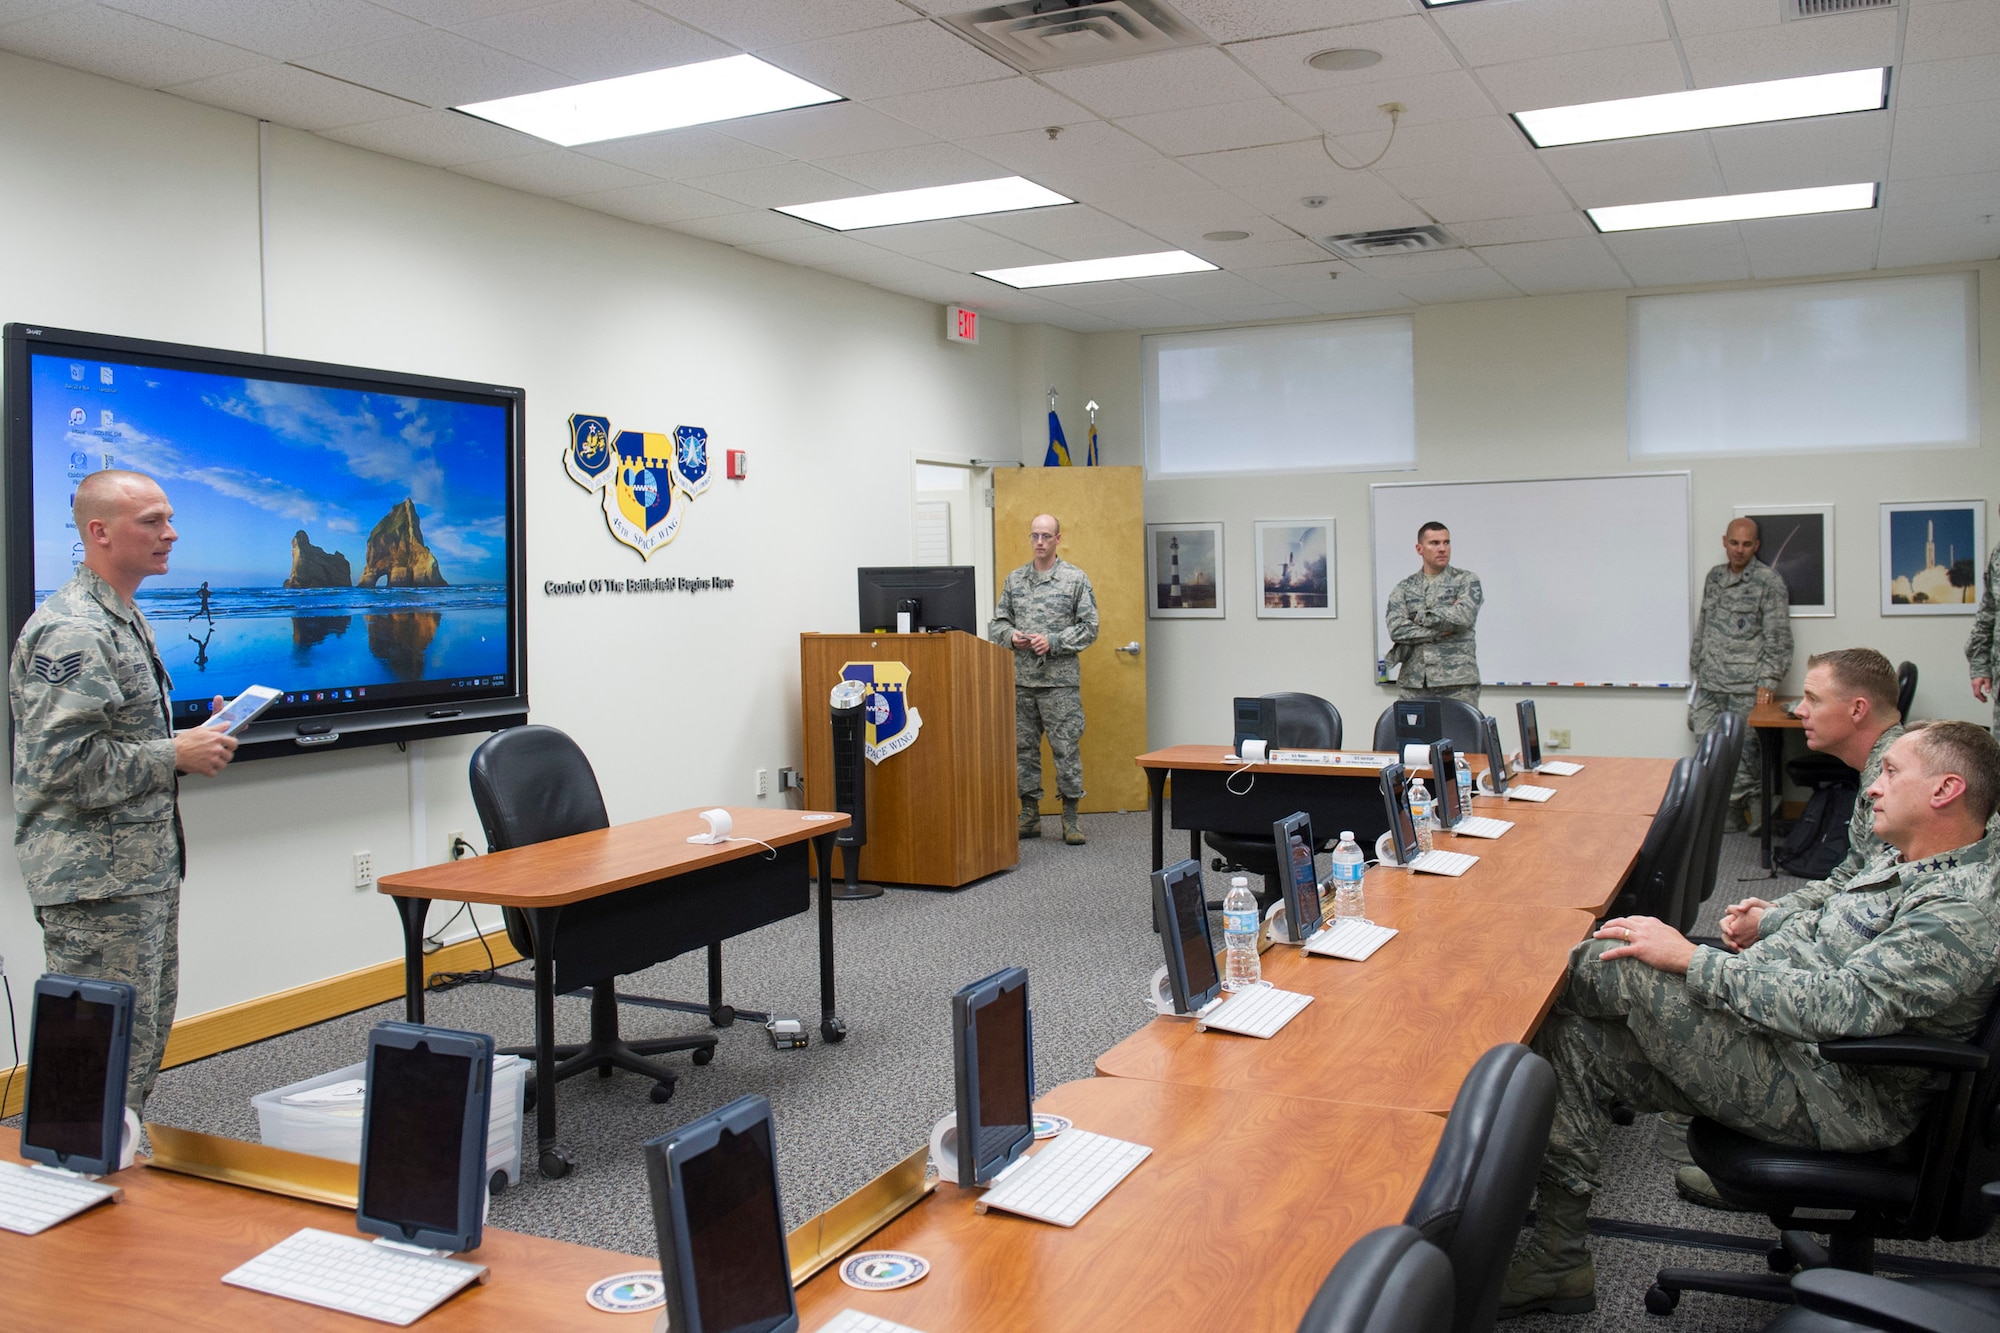 Airmen leadership school instructors describe how they’ve innovated using iPads in their course material to Lt. Gen. David J. Buck, commander, 14th Air Force (Air Forces Strategic), Air Force Space Command; and commander, Joint Functional Component Command for Space, U.S. Strategic Command, and Chief Master Sgt. Craig Neri, 14th AF command chief and command senior enlisted leader for JFCC Space, at the Patrick Air Force Base Professional Development Center May 4, 2016. Buck and Neri visited Patrick Air Force Base and Cape Canaveral Air Force Station May 4 and 5 and gained insight into the contributions Airmen across the wing make to keep the 45th Space Wing the World's Premier Gateway to Space. (U.S. Air Force photo by Matthew Jurgens/Released)